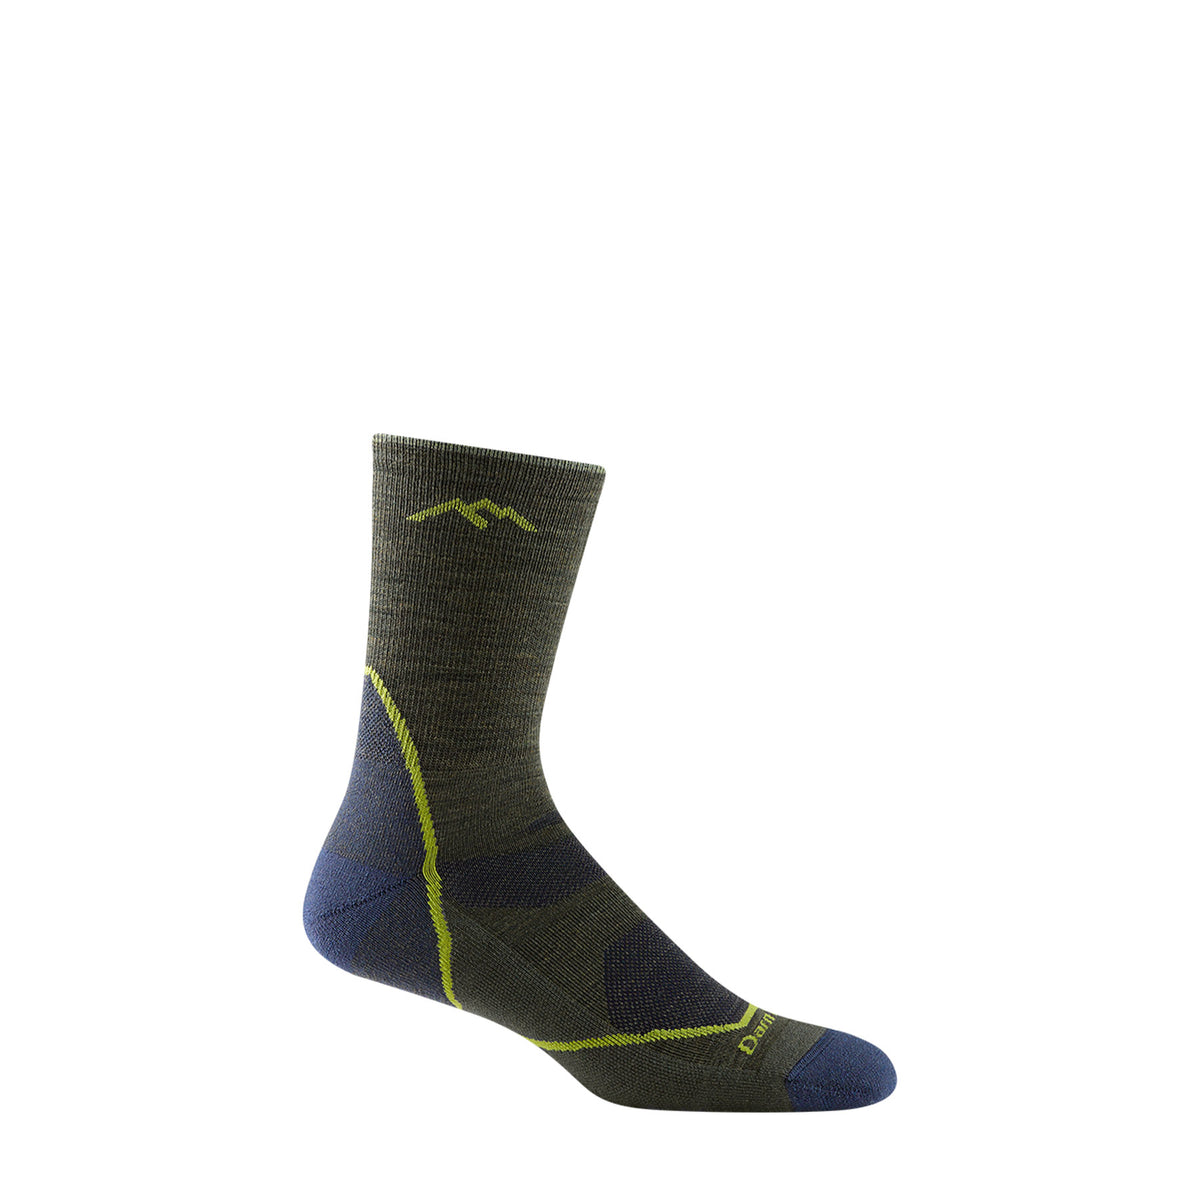 Image features the Darn Tough Light Hiker Micro Crew sock in forest green with a blue heel and toe patch.